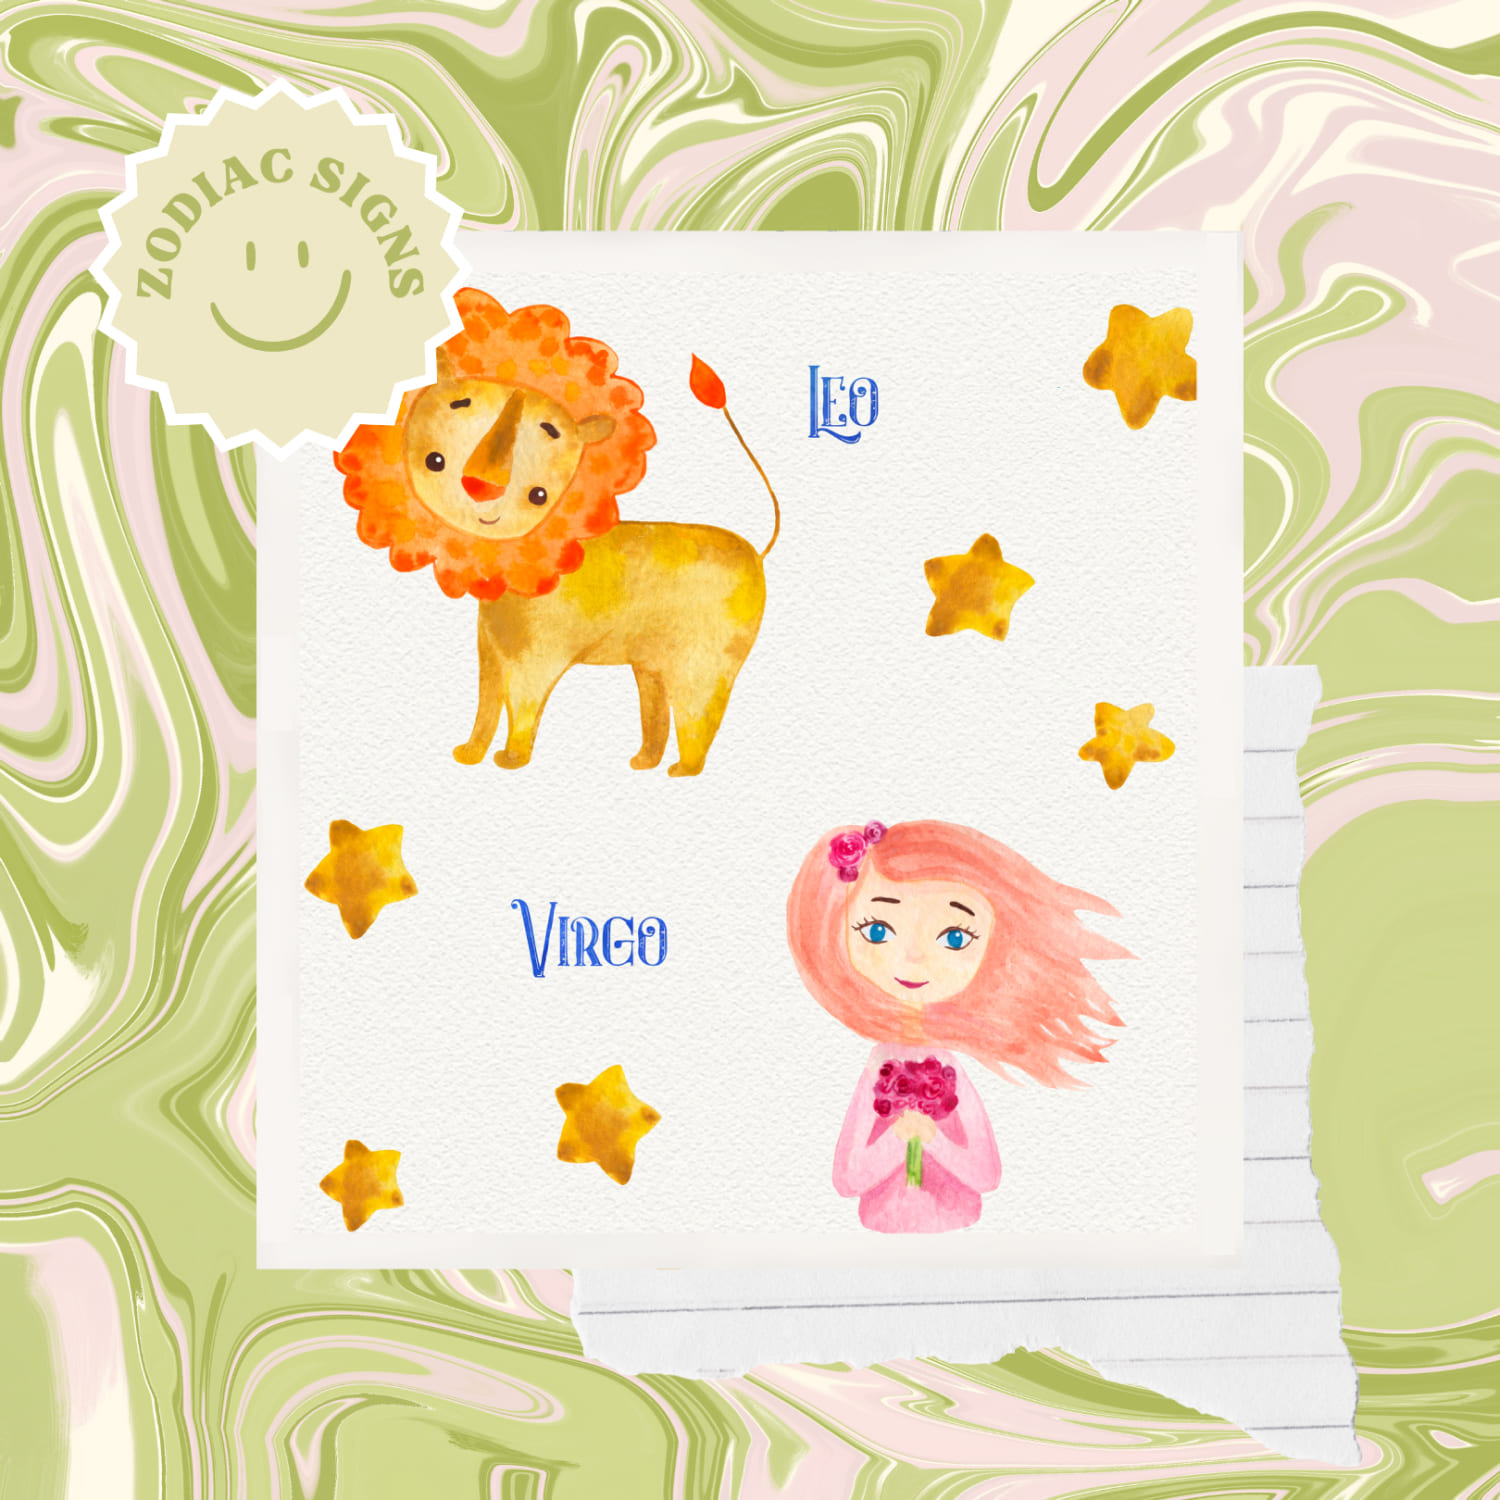 Zodiac signs - leo and virgo - in a watercolor.